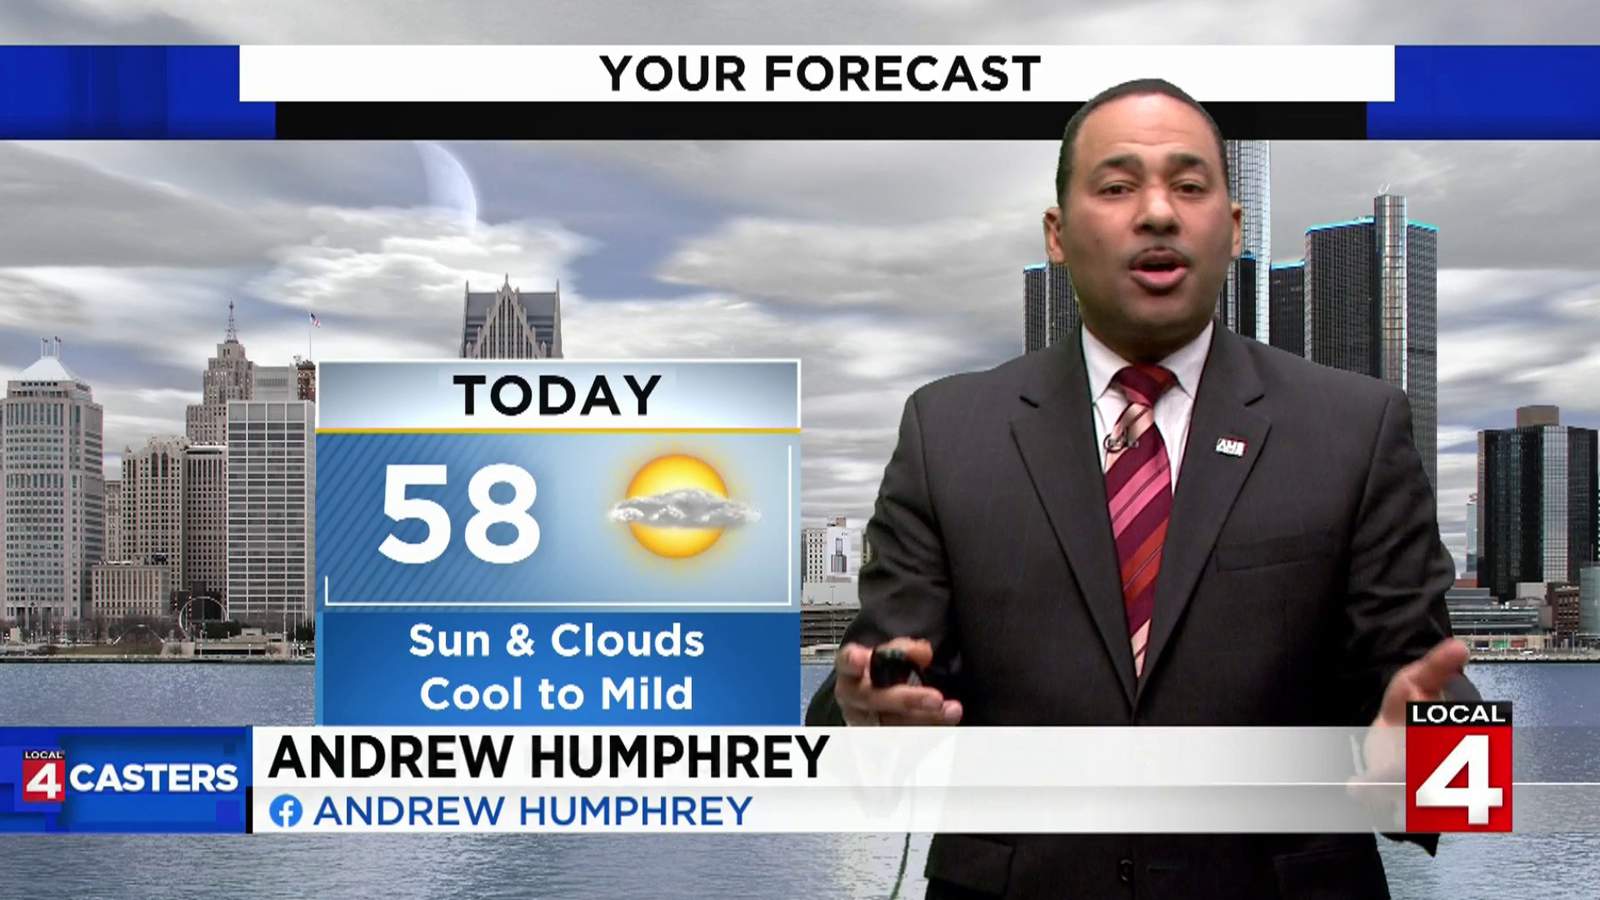 Metro Detroit weather: More mild Saturday afternoon with sun and clouds